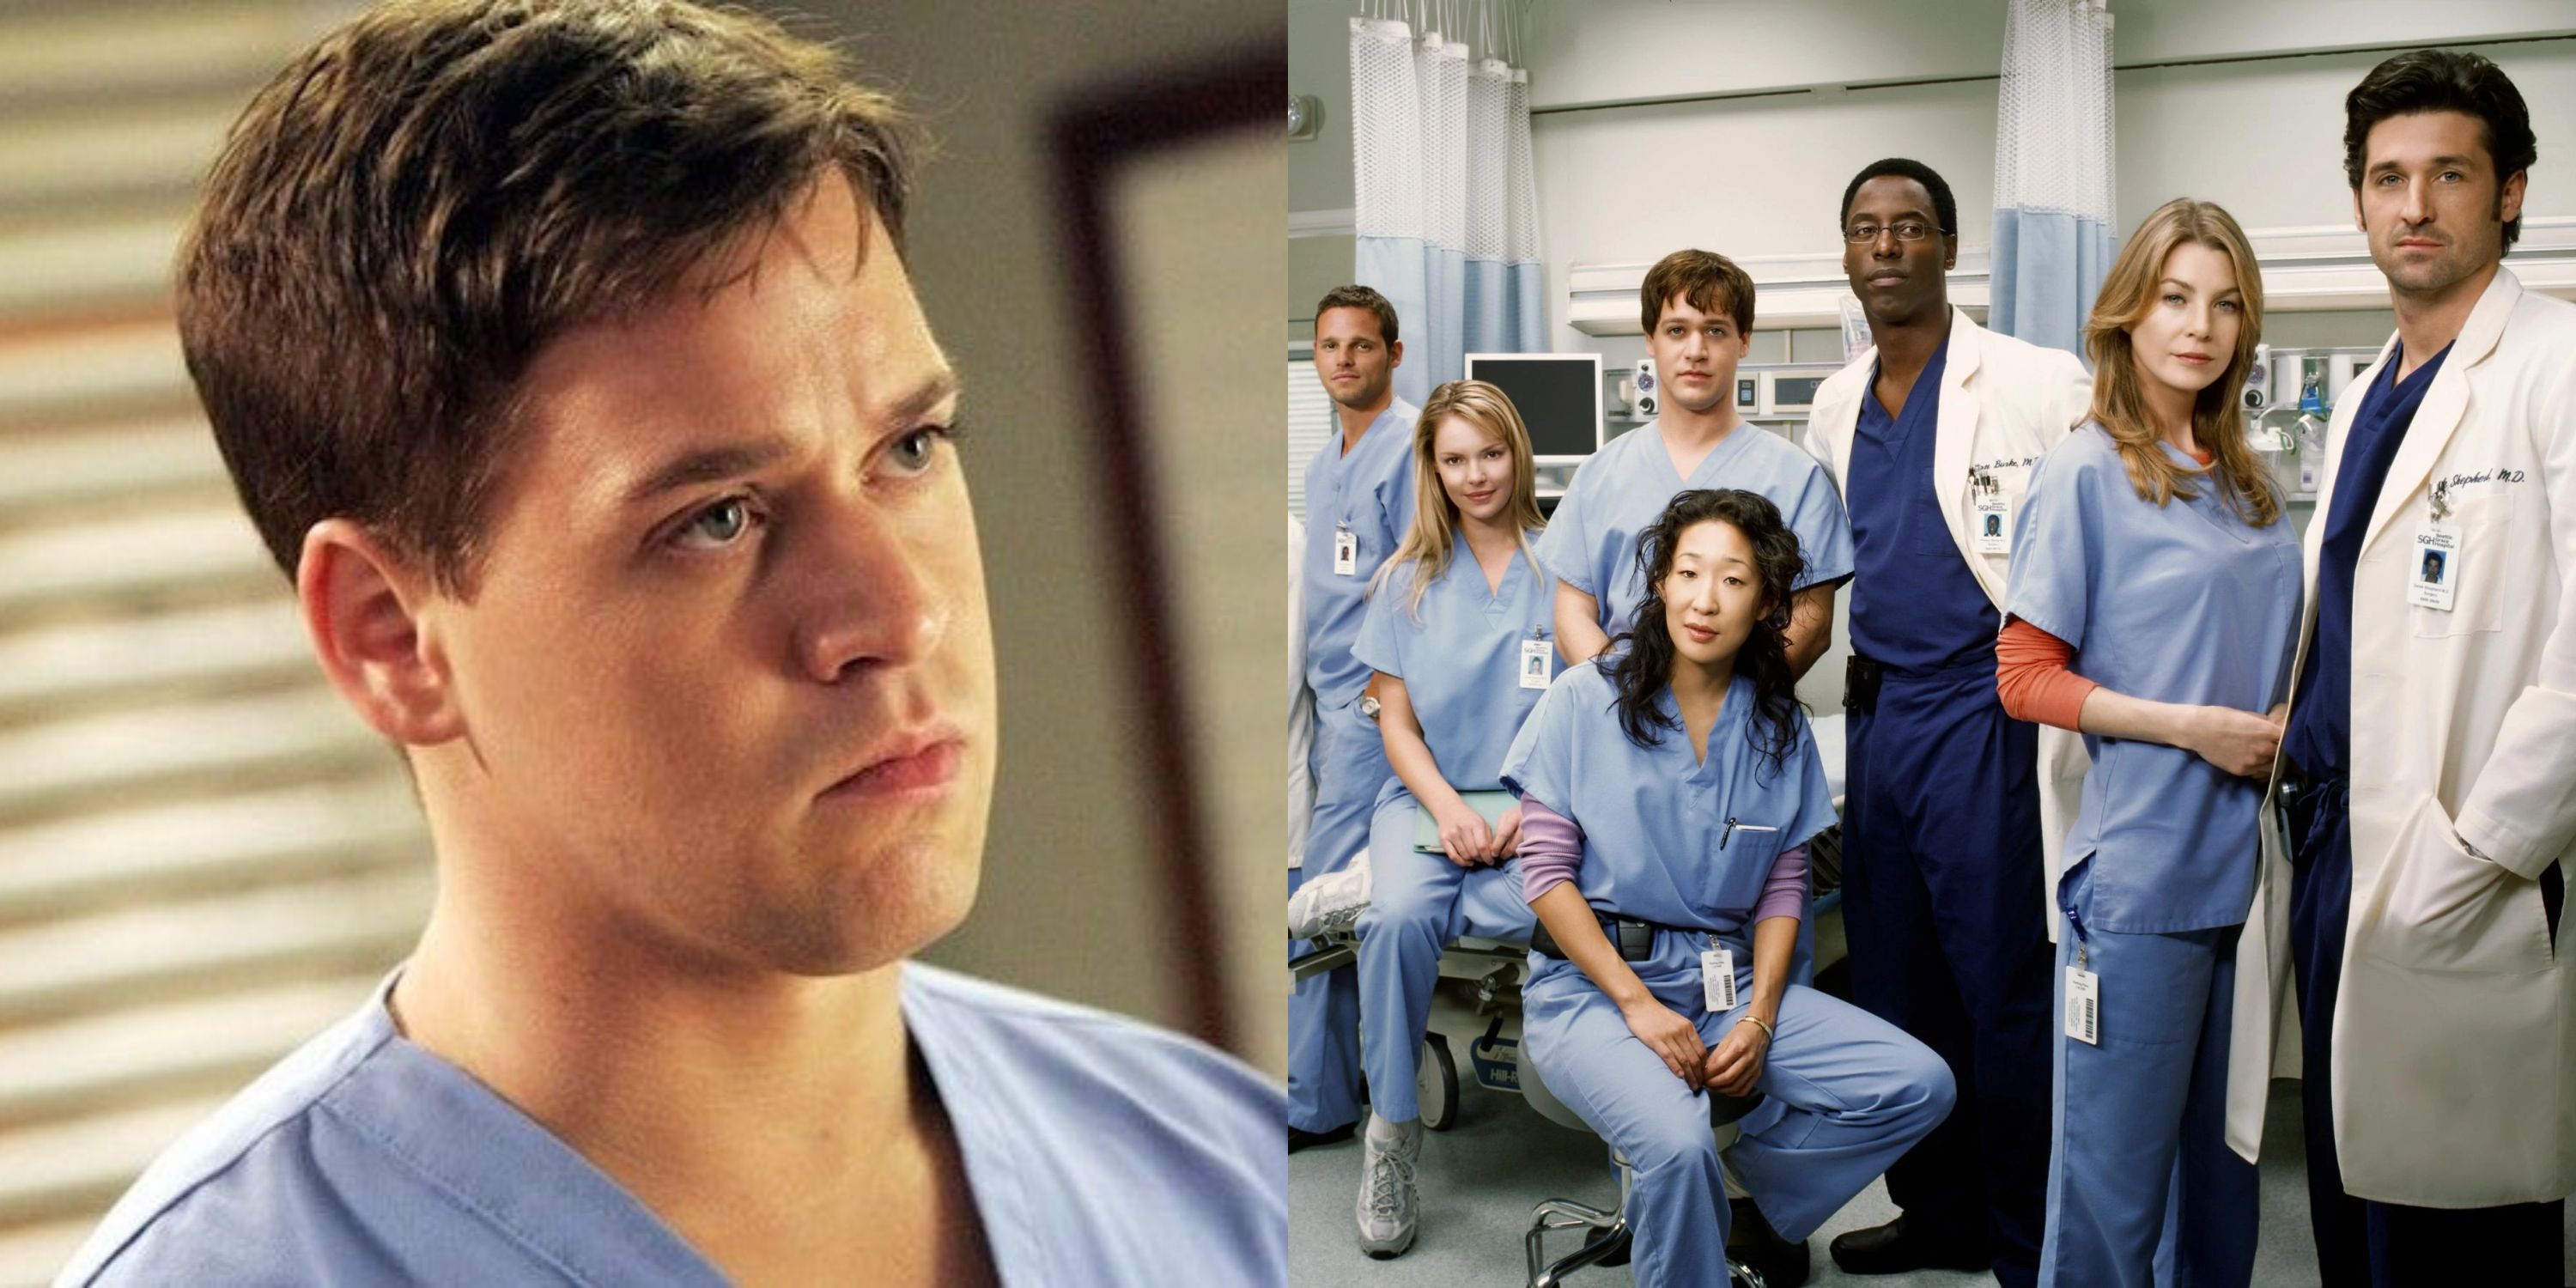 Featured image George and the main cast of Greys Anatomy